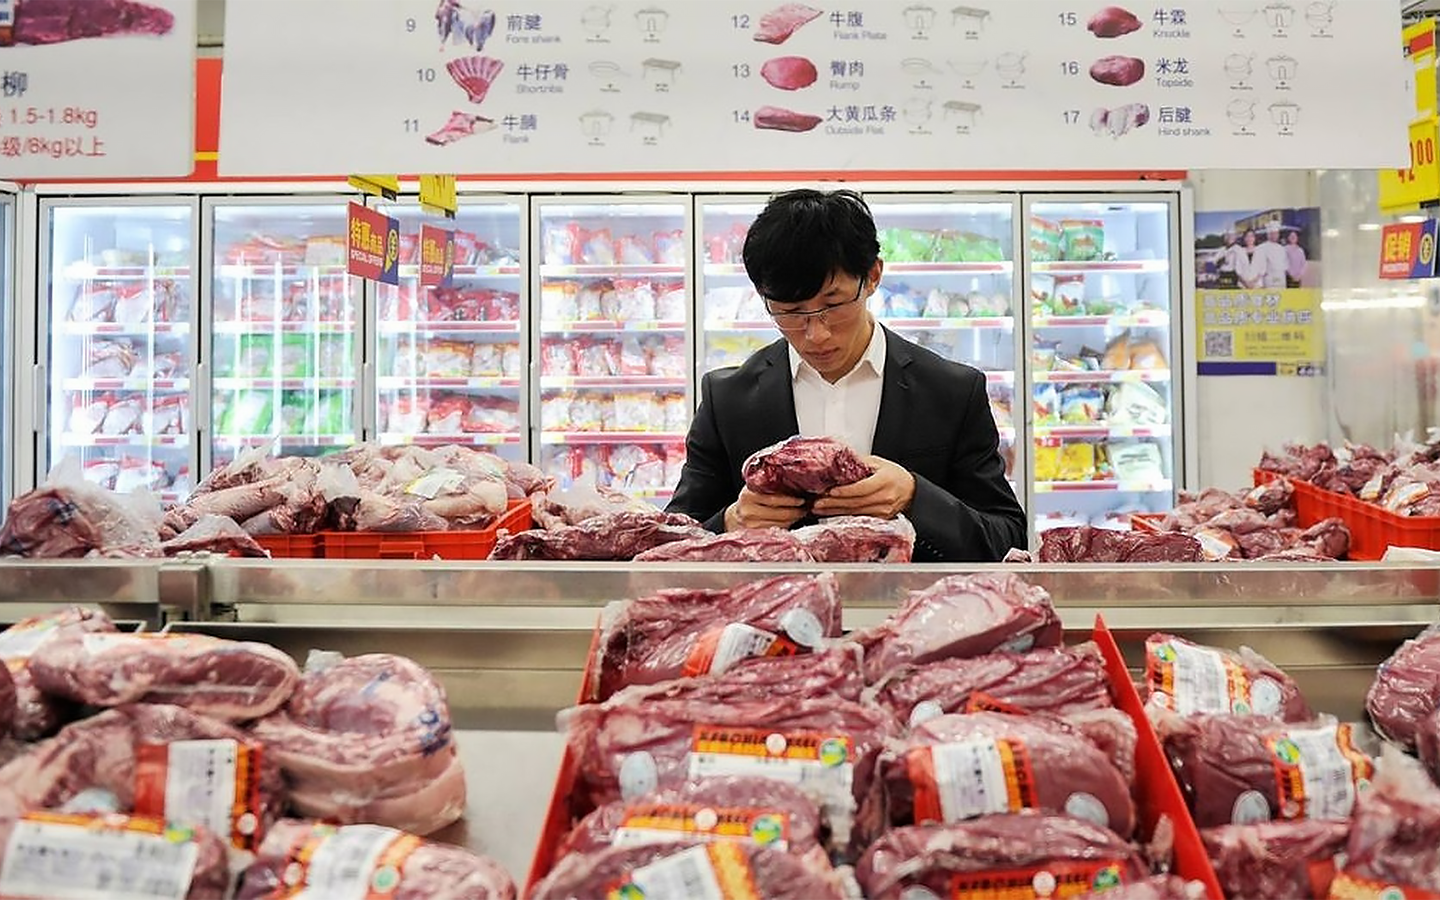 Brazil still exporting beef to China despite “mad cow” disease ban